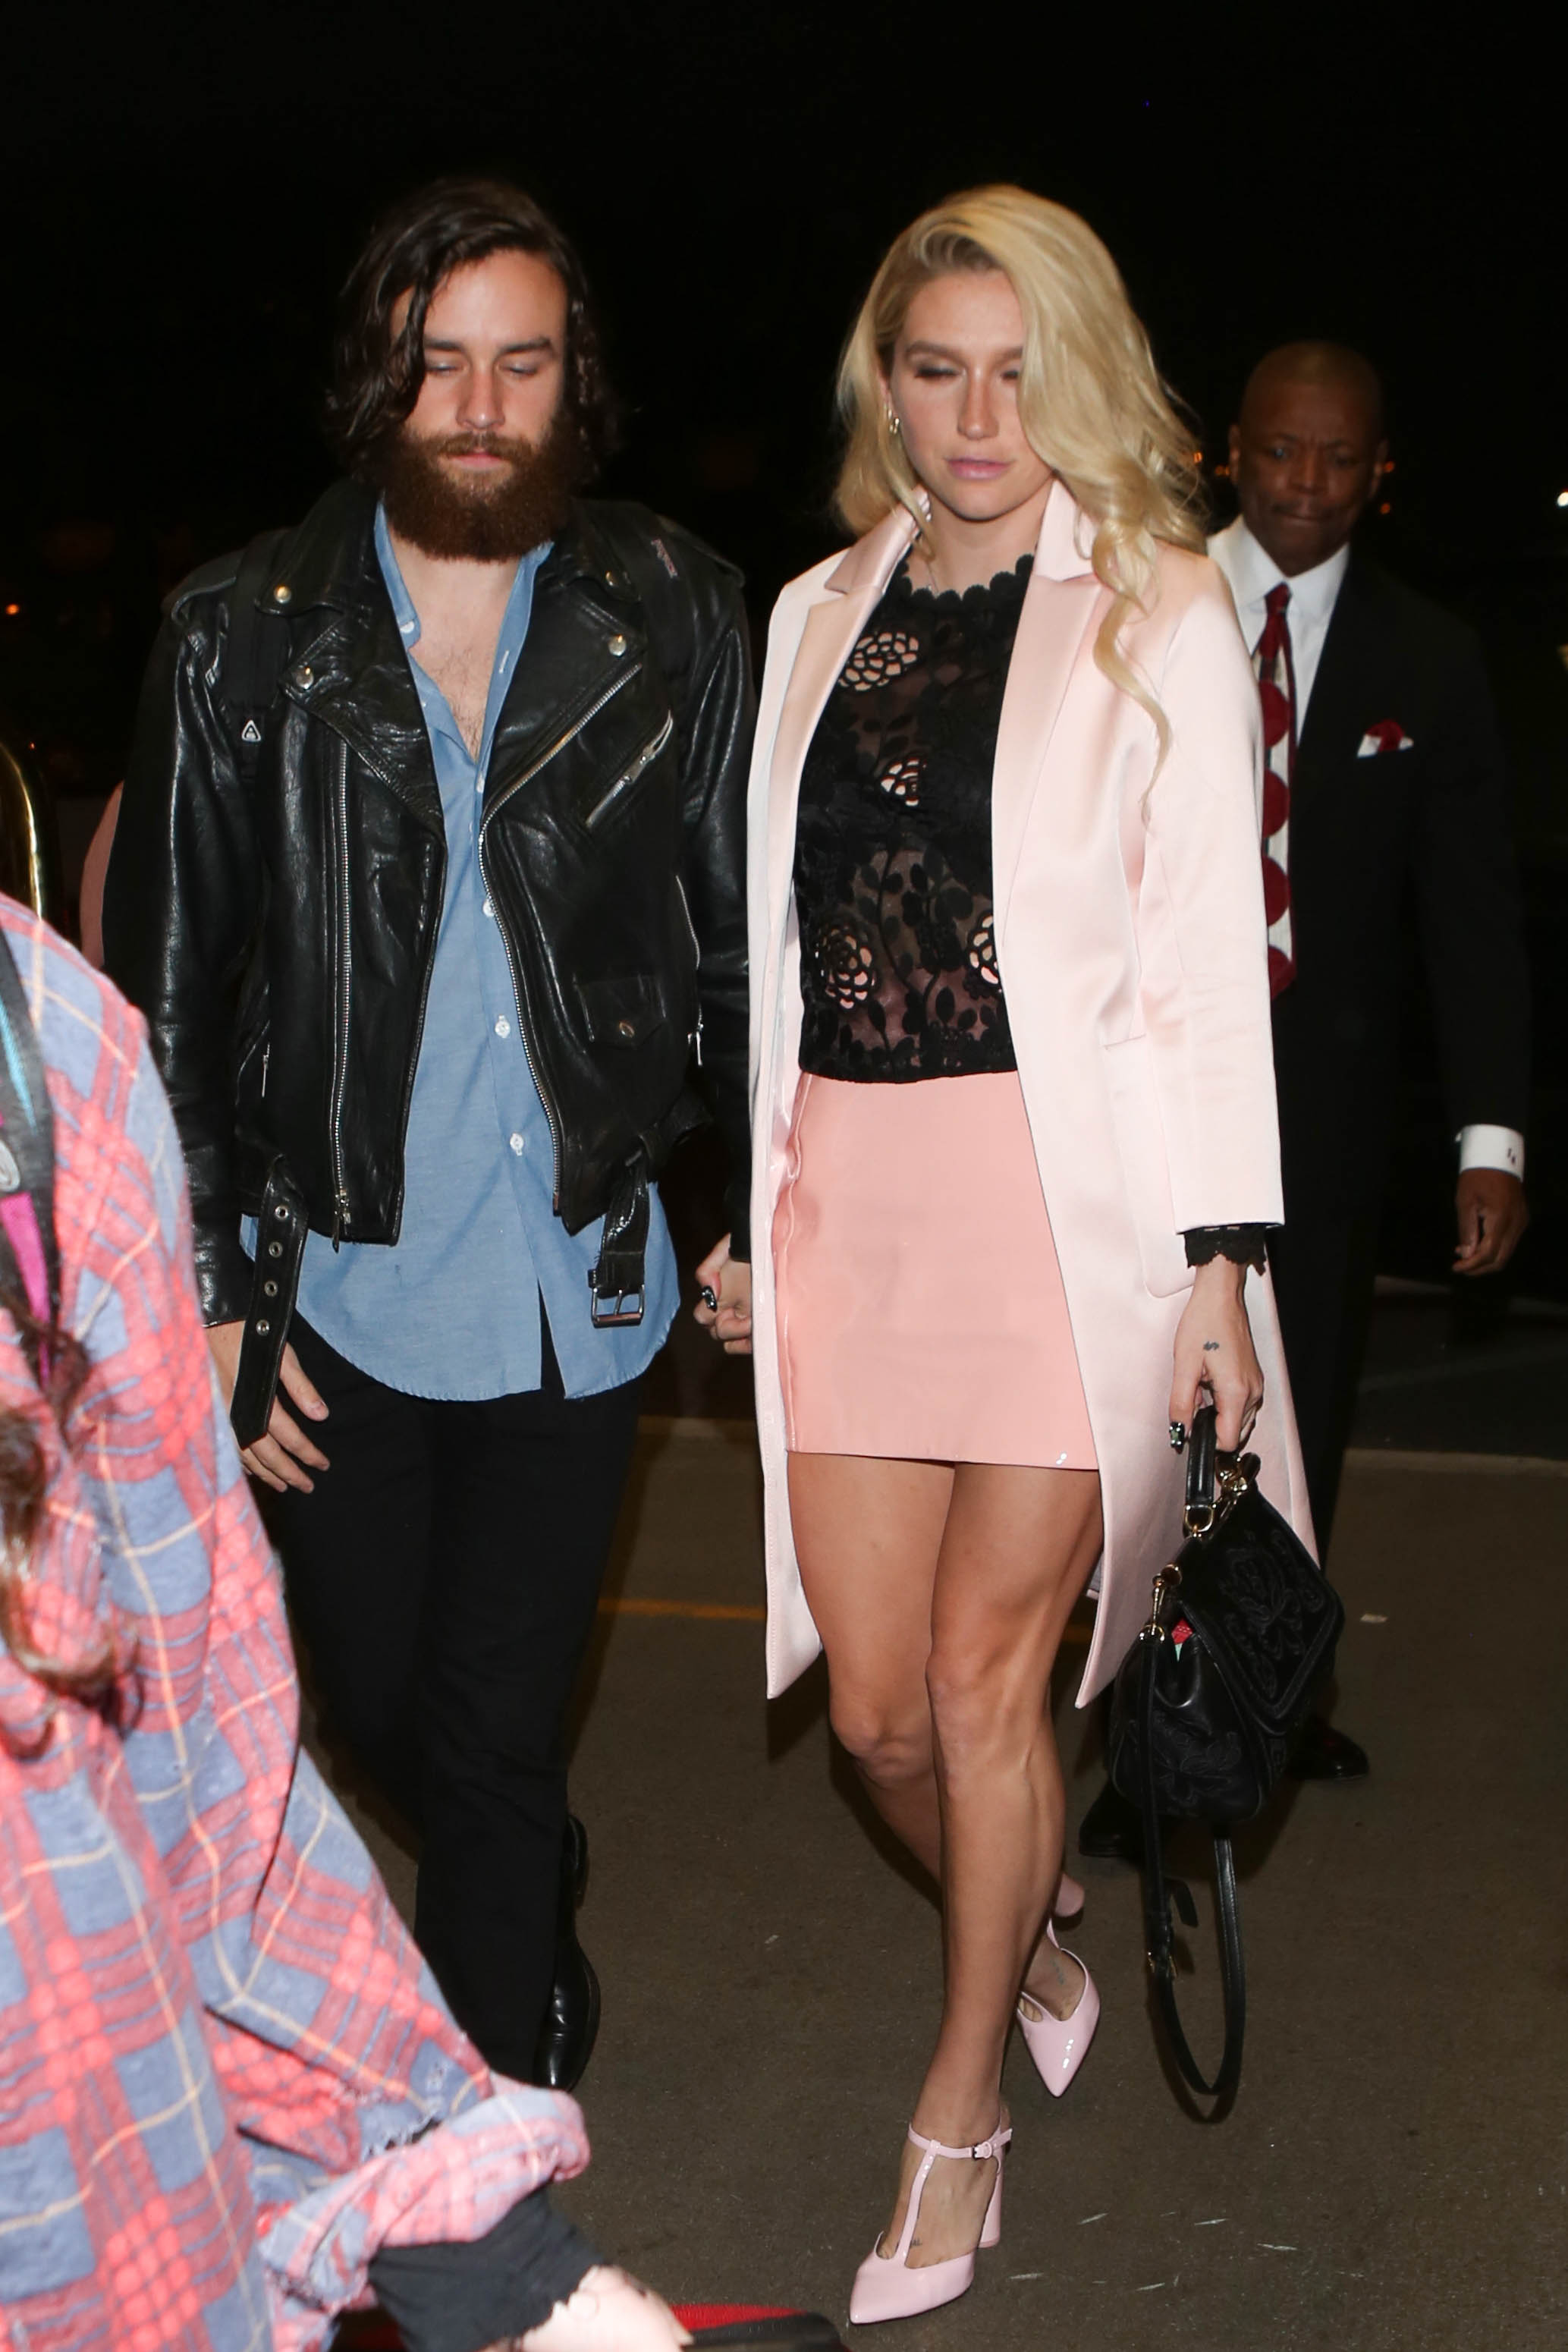 Kesha departing on a flight at LAX airport in Los Angeles